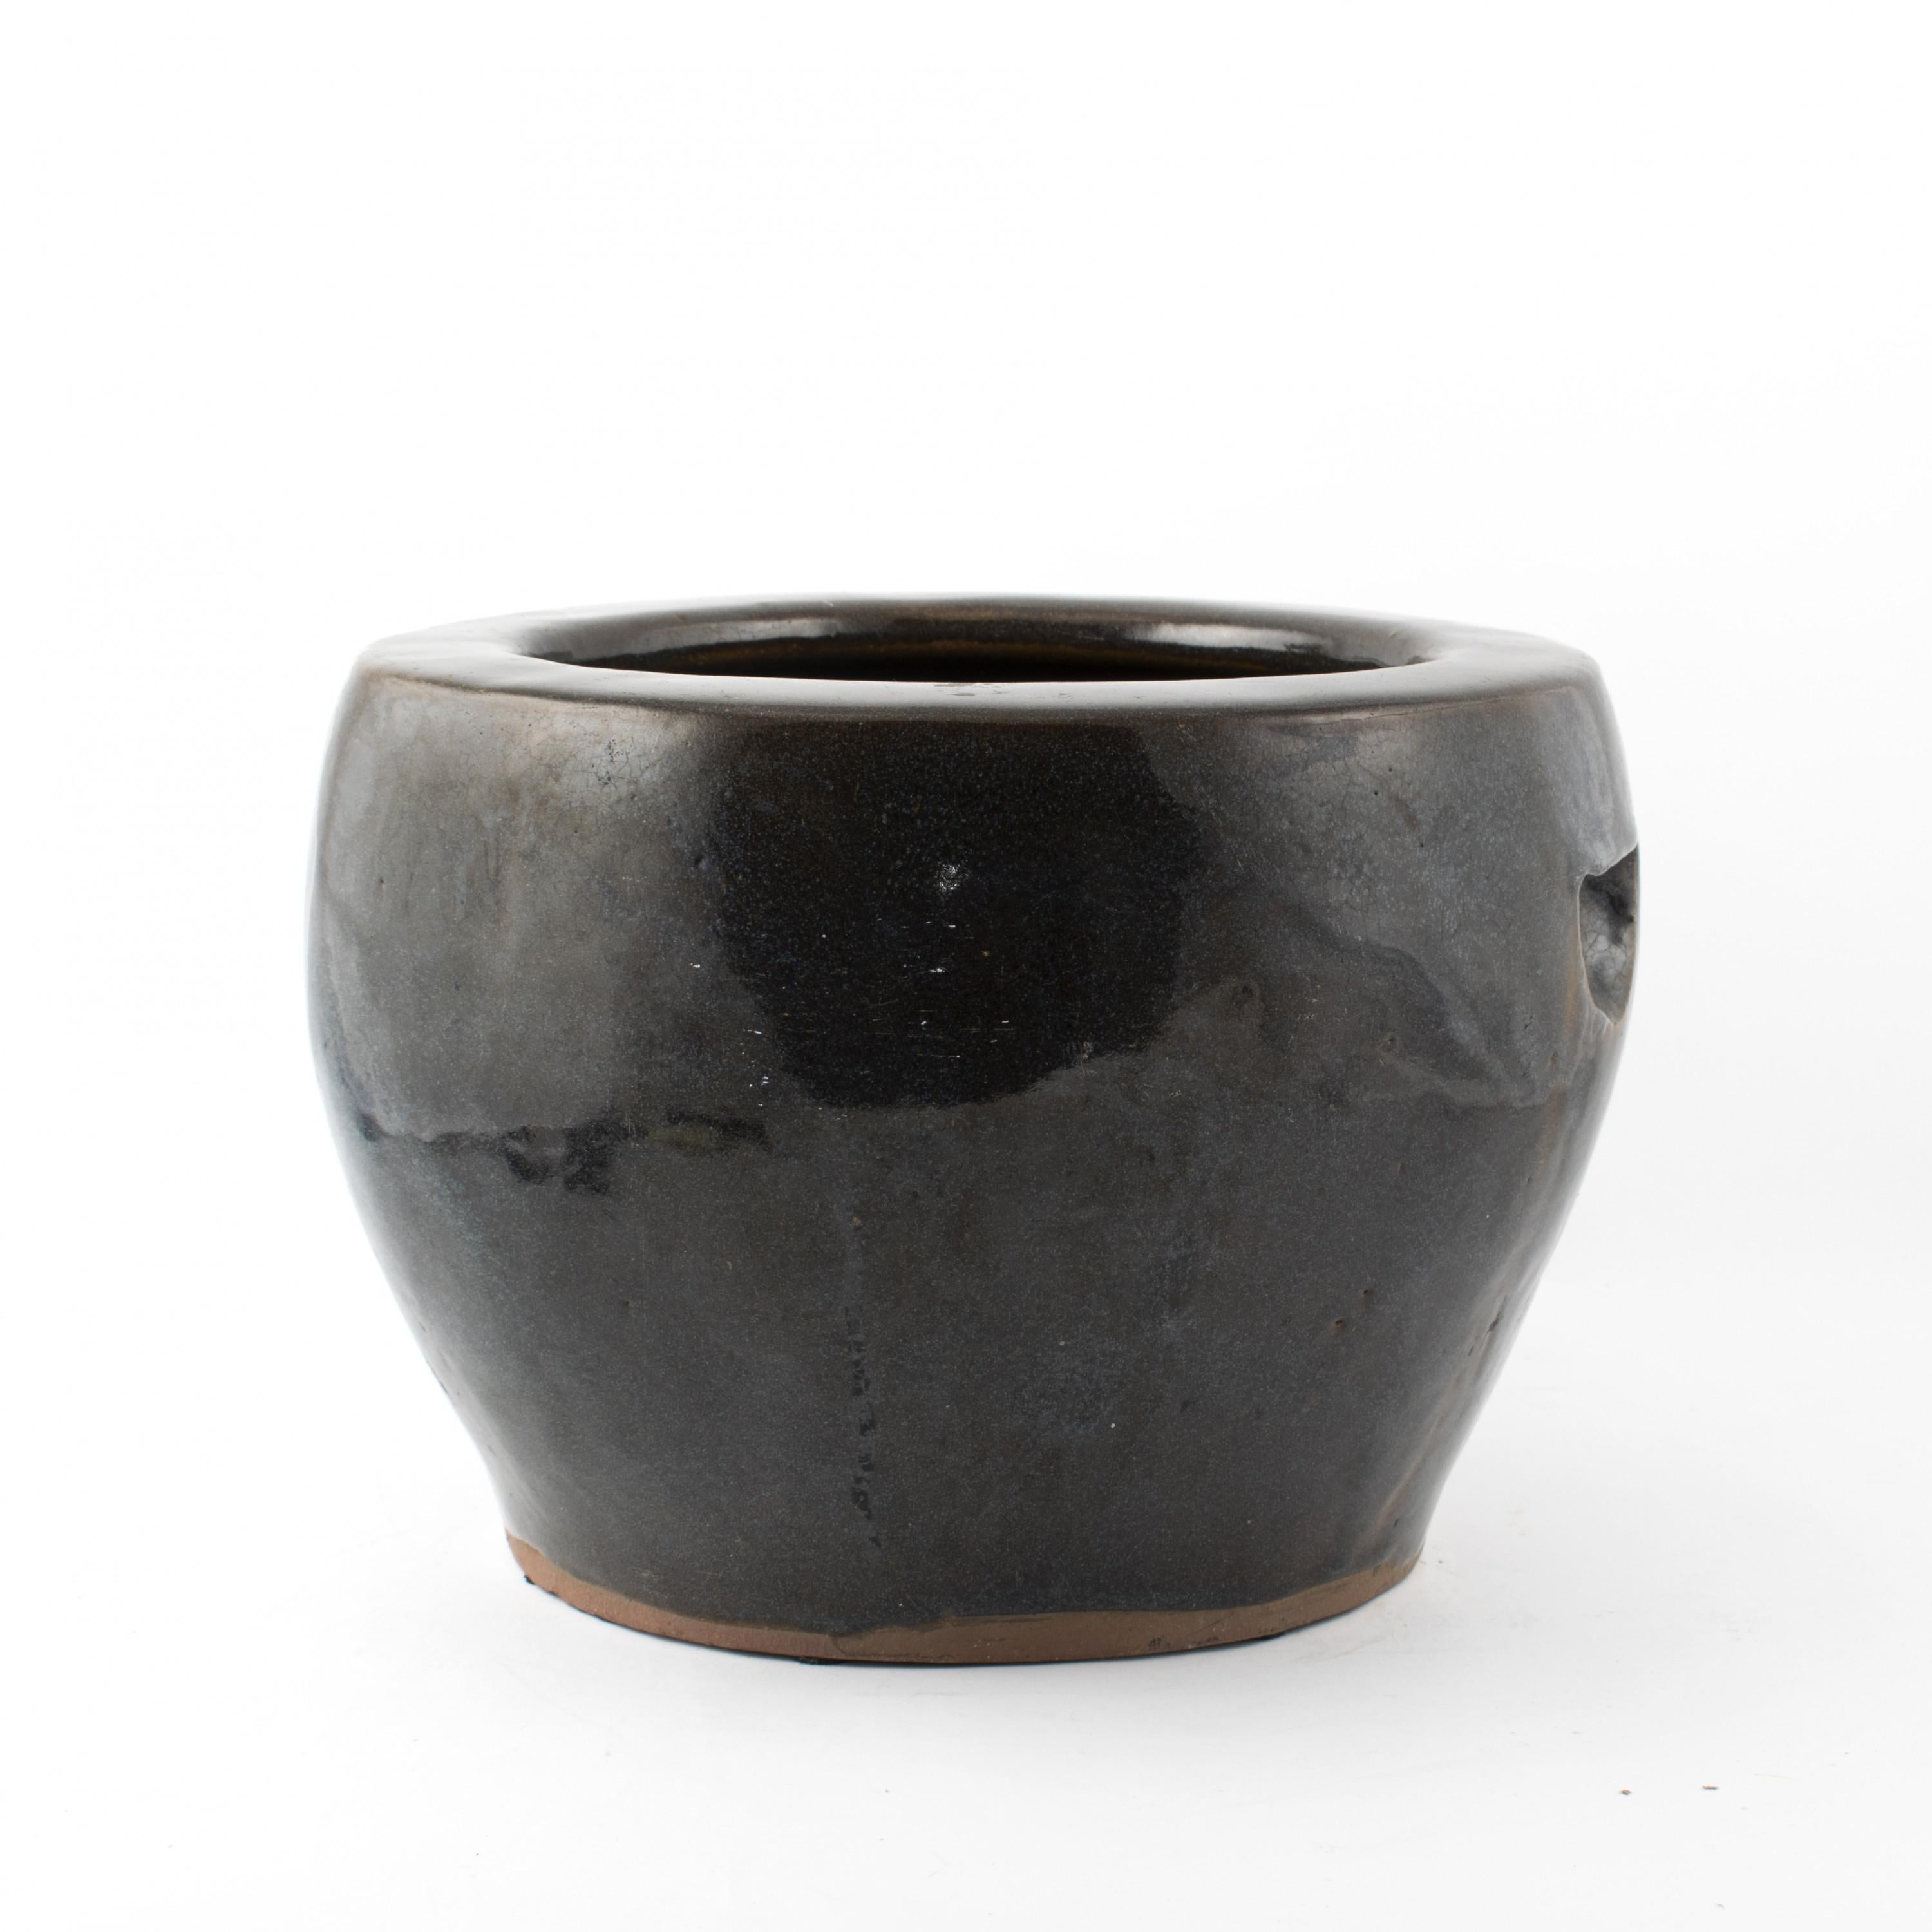 Large Chinese jardinière or planter with petroleum blue colored glaze.
Incisions at the sides for lifting.
Natural age-related patina,
China, circa 1900.